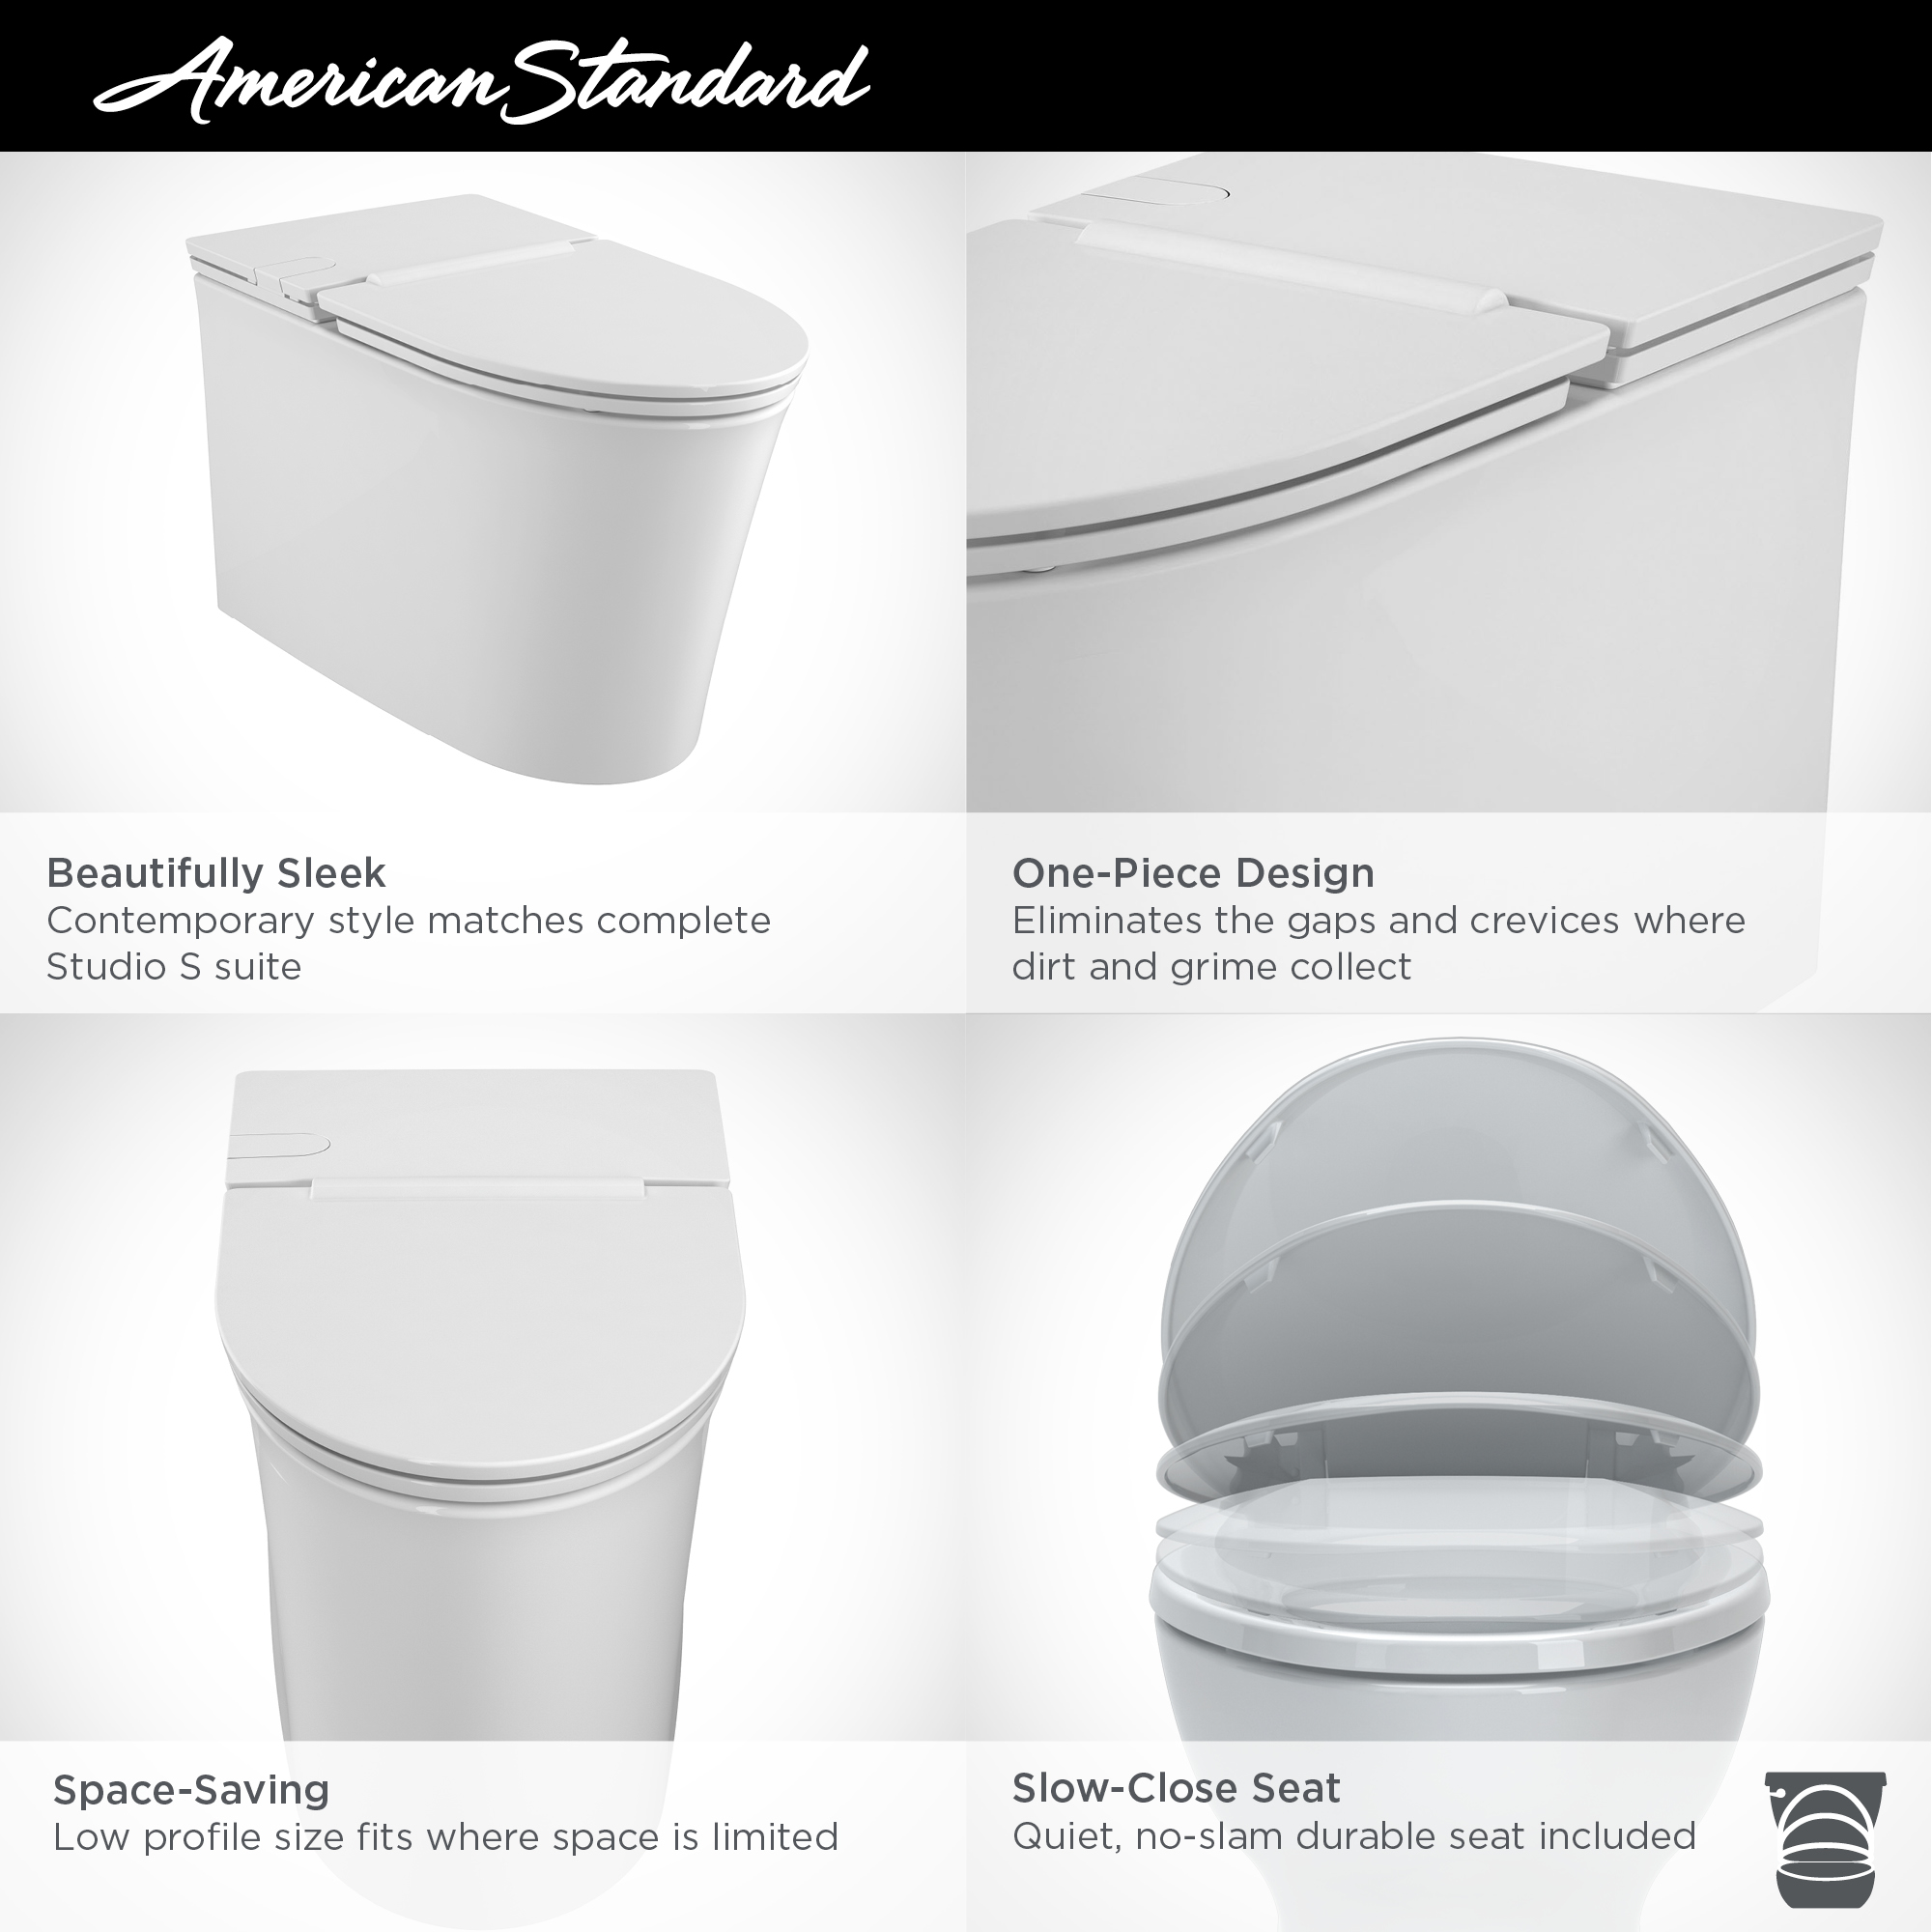 American Standard Studio S 1-piece 1.0 GPF White Elongated Low-Profile Toilet, Seat Included - image 4 of 14